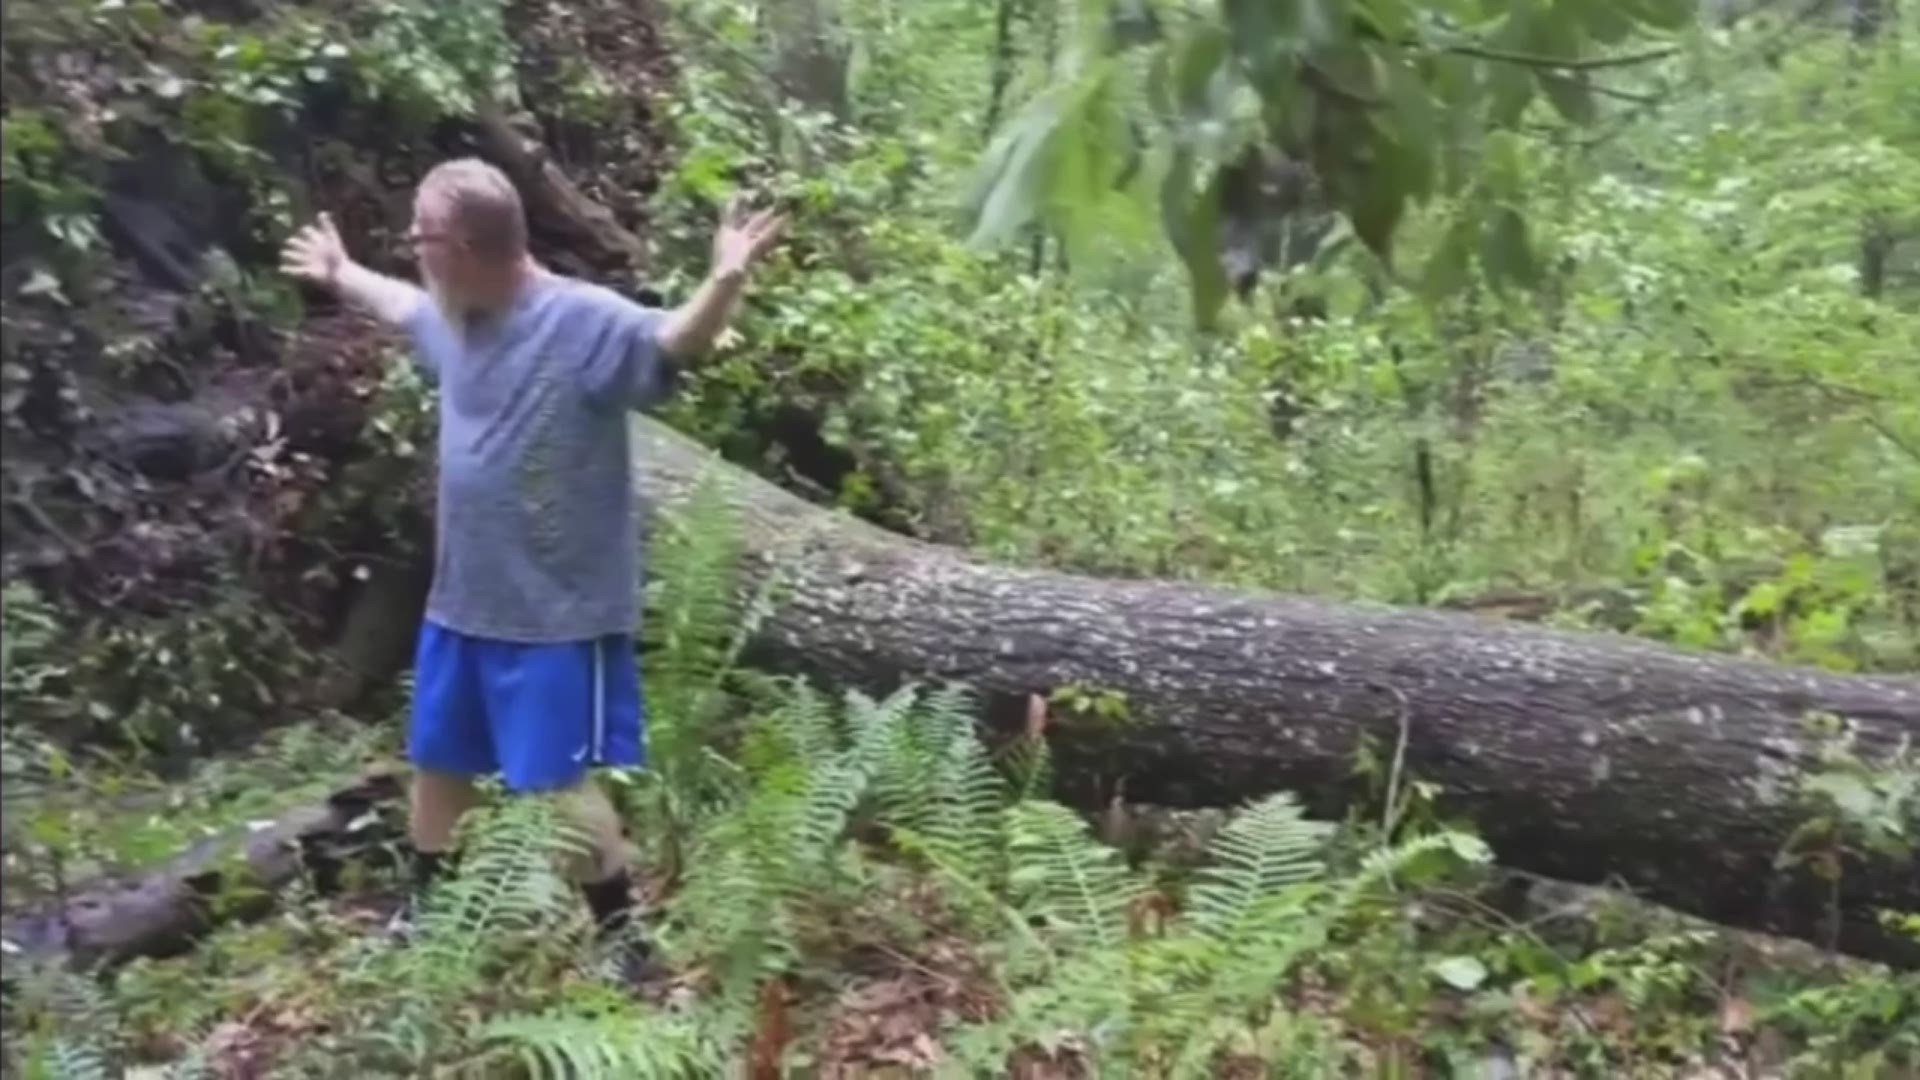 A tree was uprooted after a storm in Middleburg.